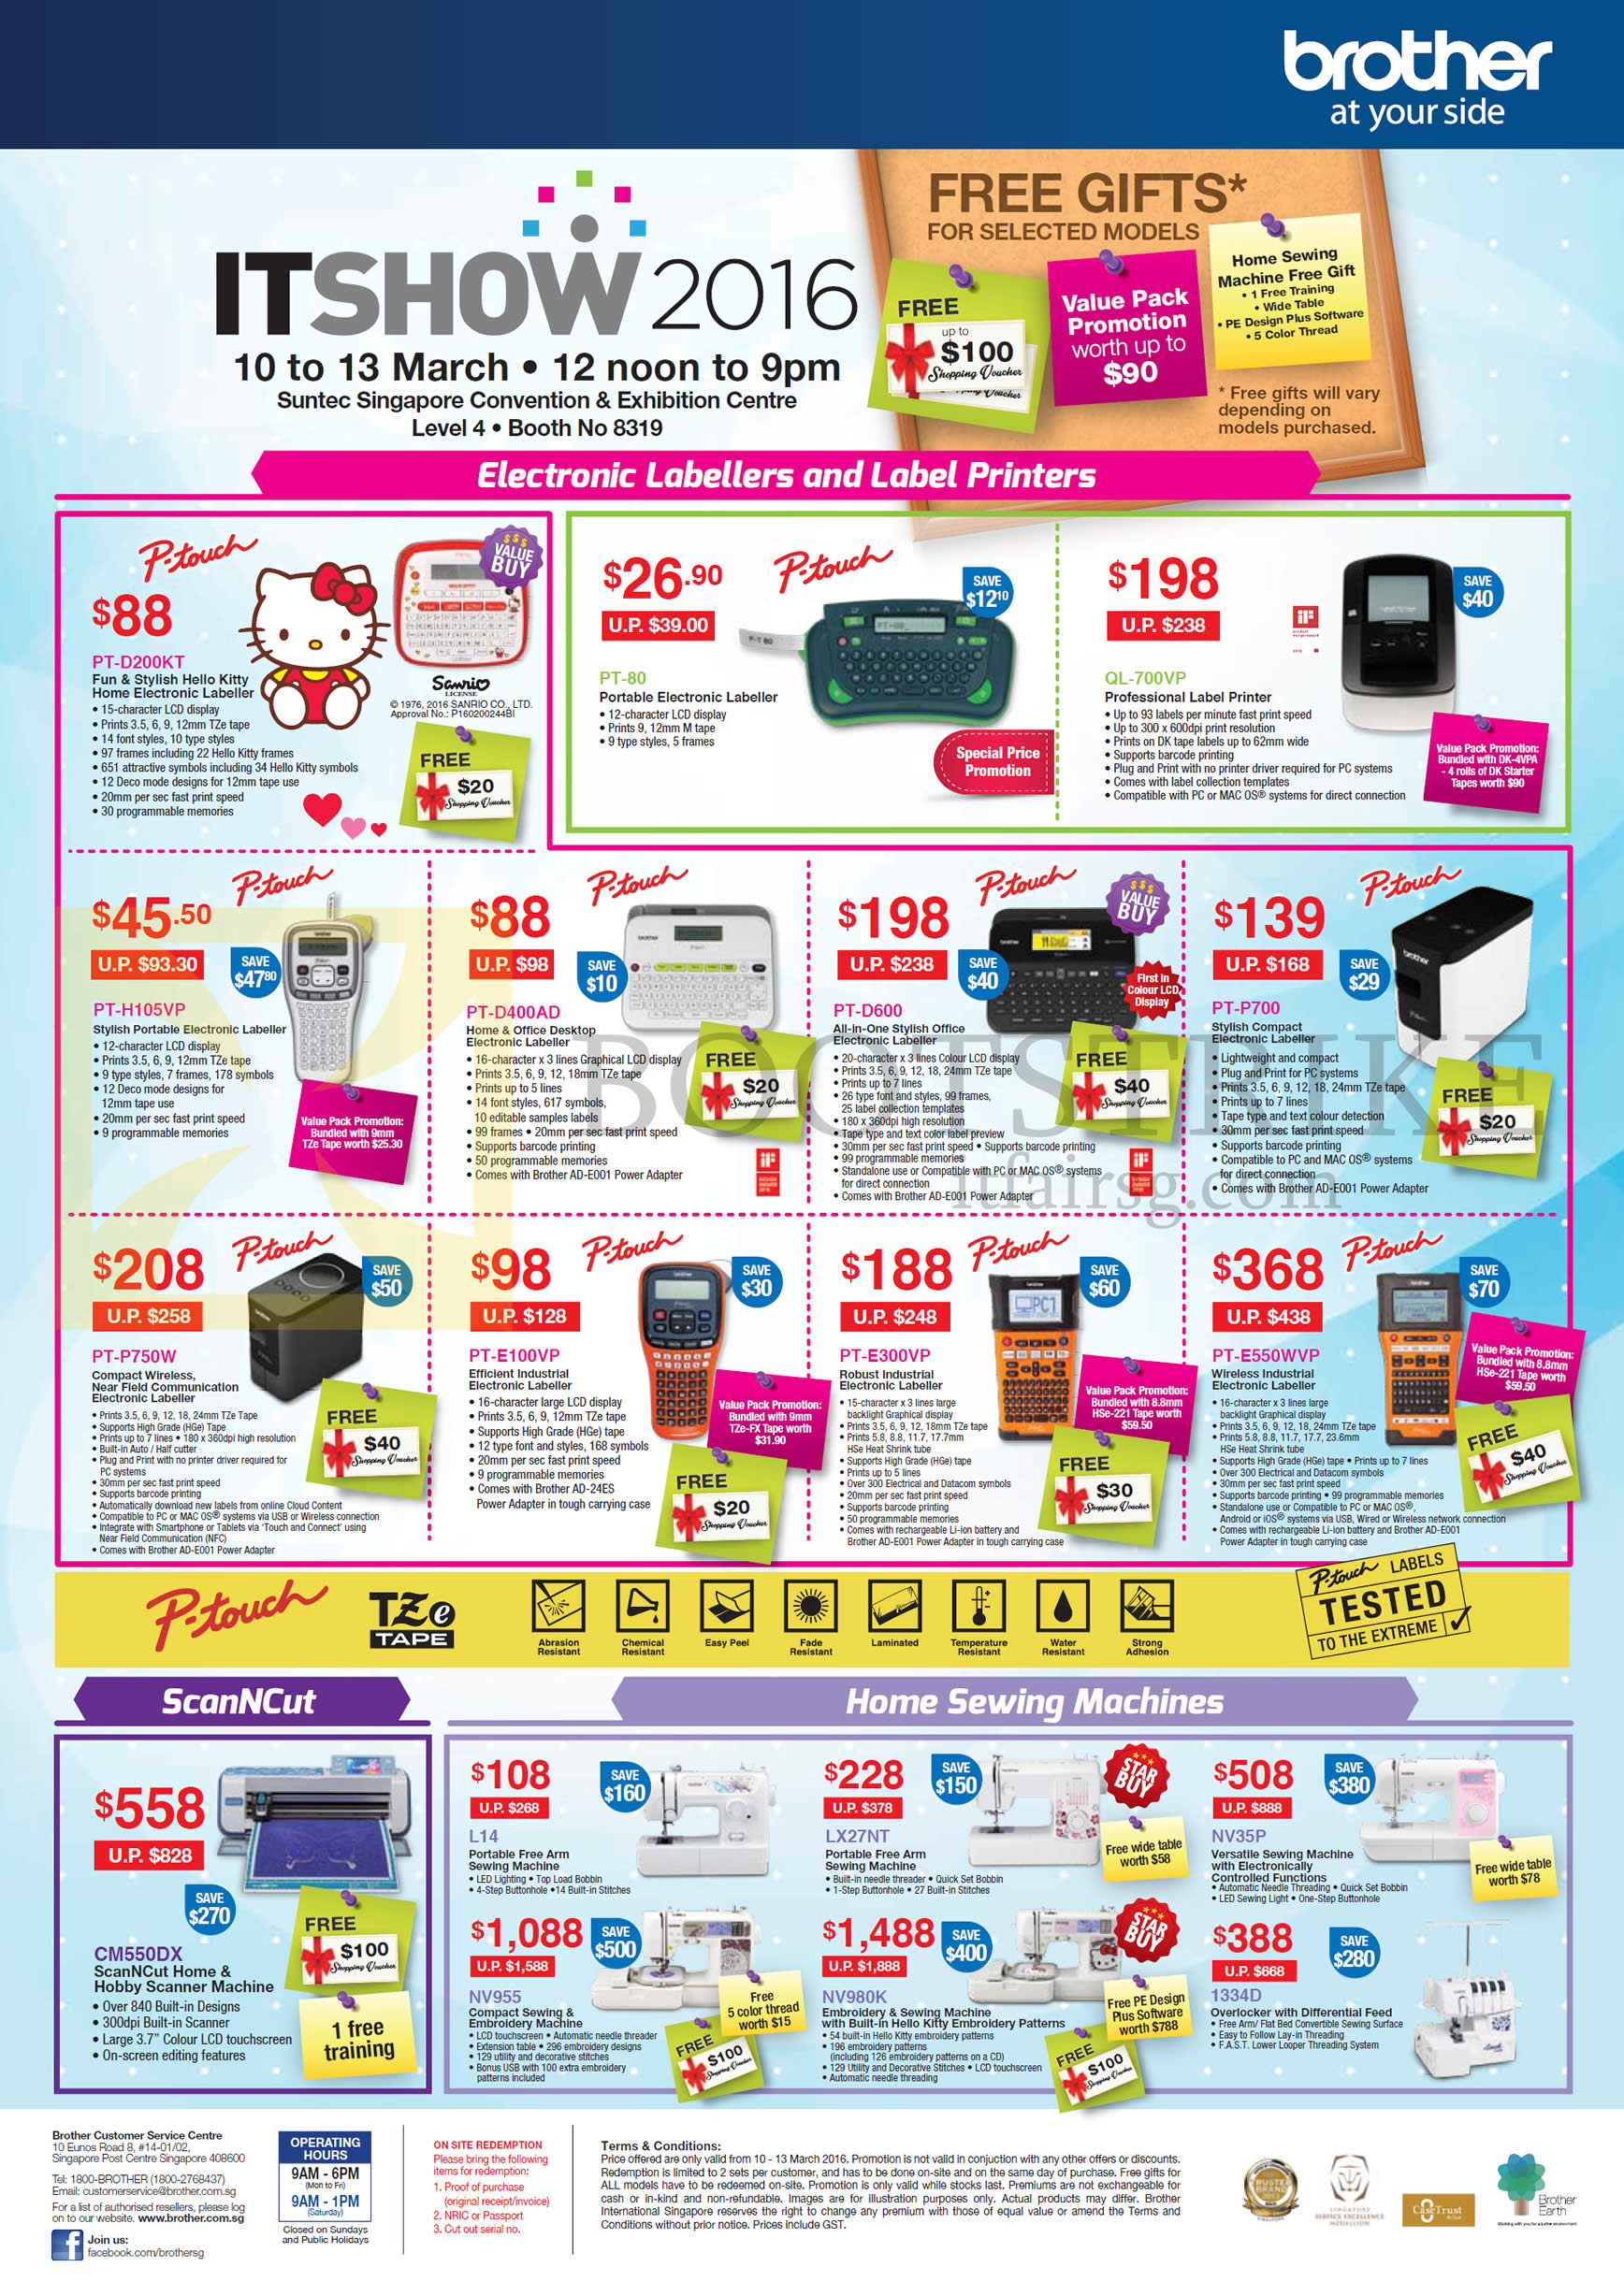 IT SHOW 2016 price list image brochure of Brother P-Touch Labellers, Scanners, Home Sewing Machines, PT-D200KT, 80, H105VP, D400AD, D600, P700, P750W, E100VP, E300VP, E550WVP, QL-700VP, CM550DX